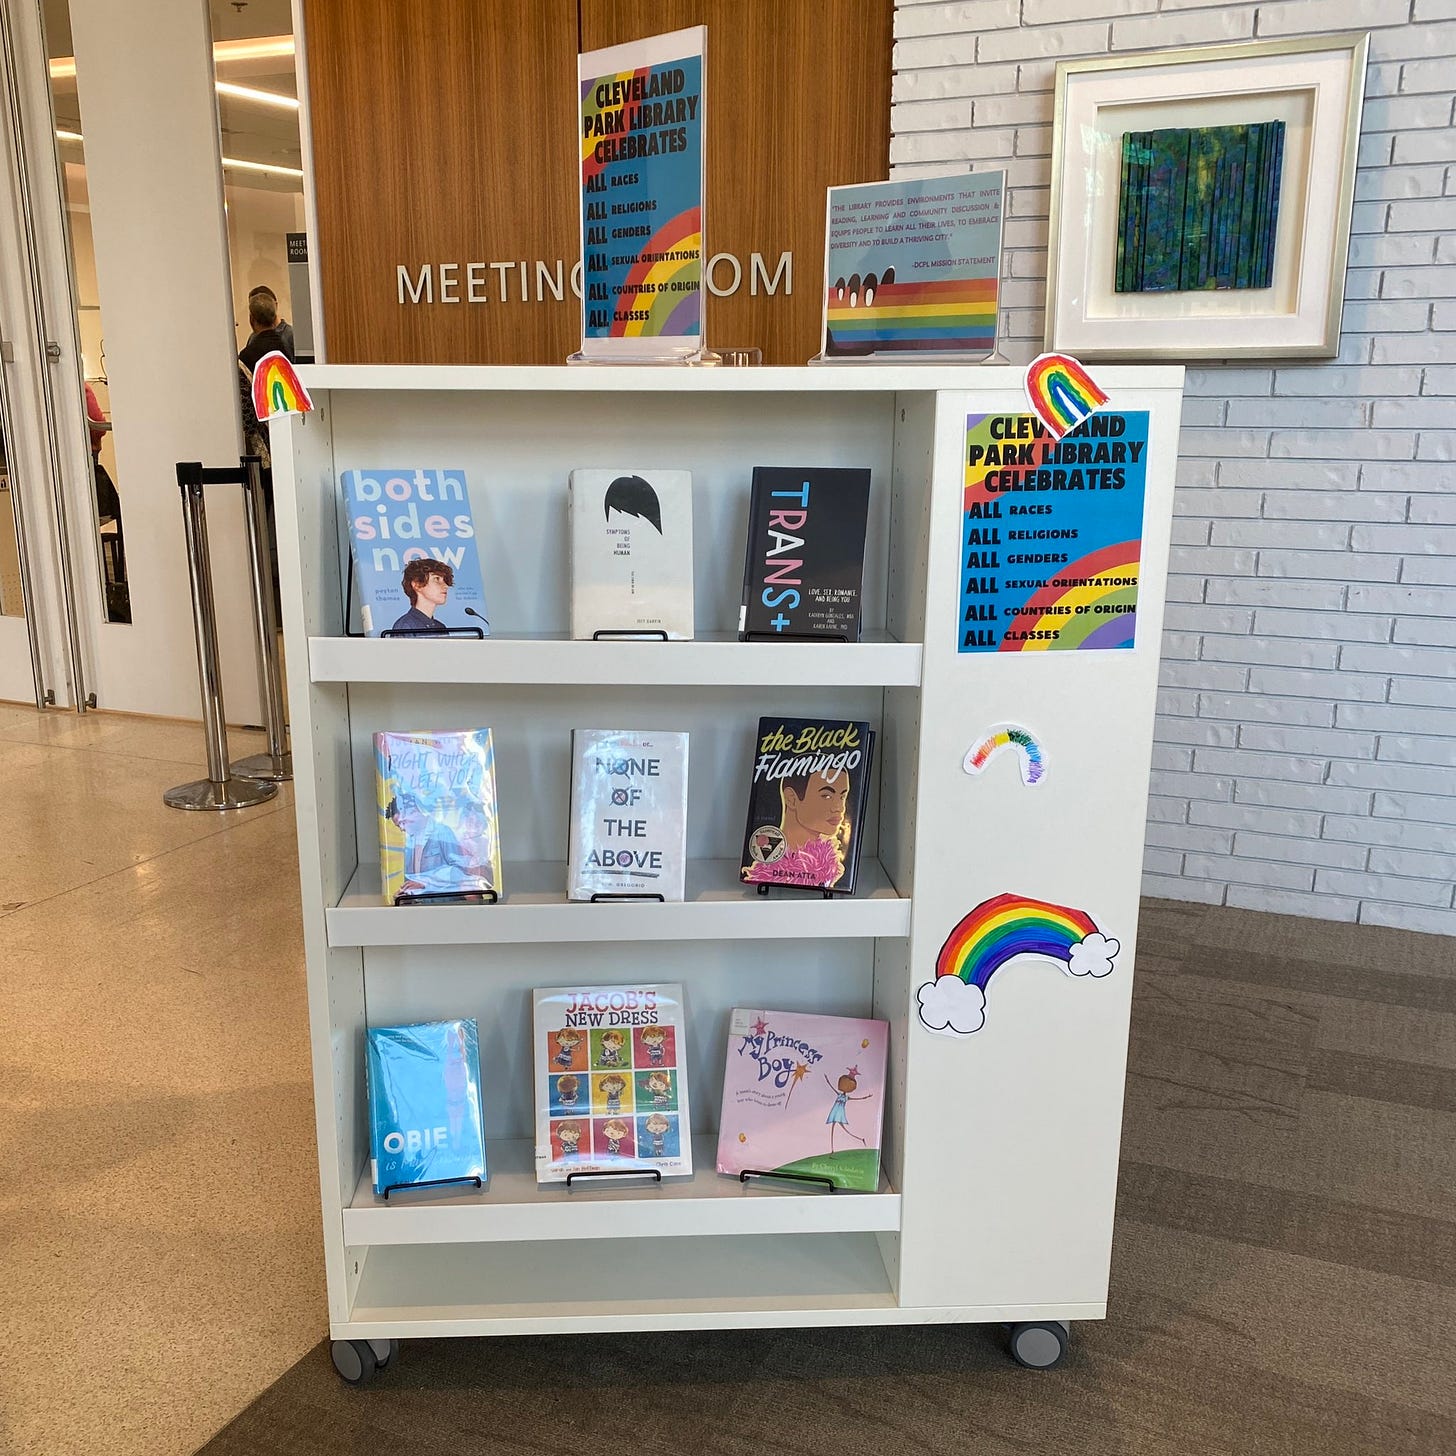 A sign on the bookshelf says Cleveland Park Library celebrates all races, religions, genders, sexual orientations, countries of origin, and classes. Three additional pride rainbows are also on the bookshelf.